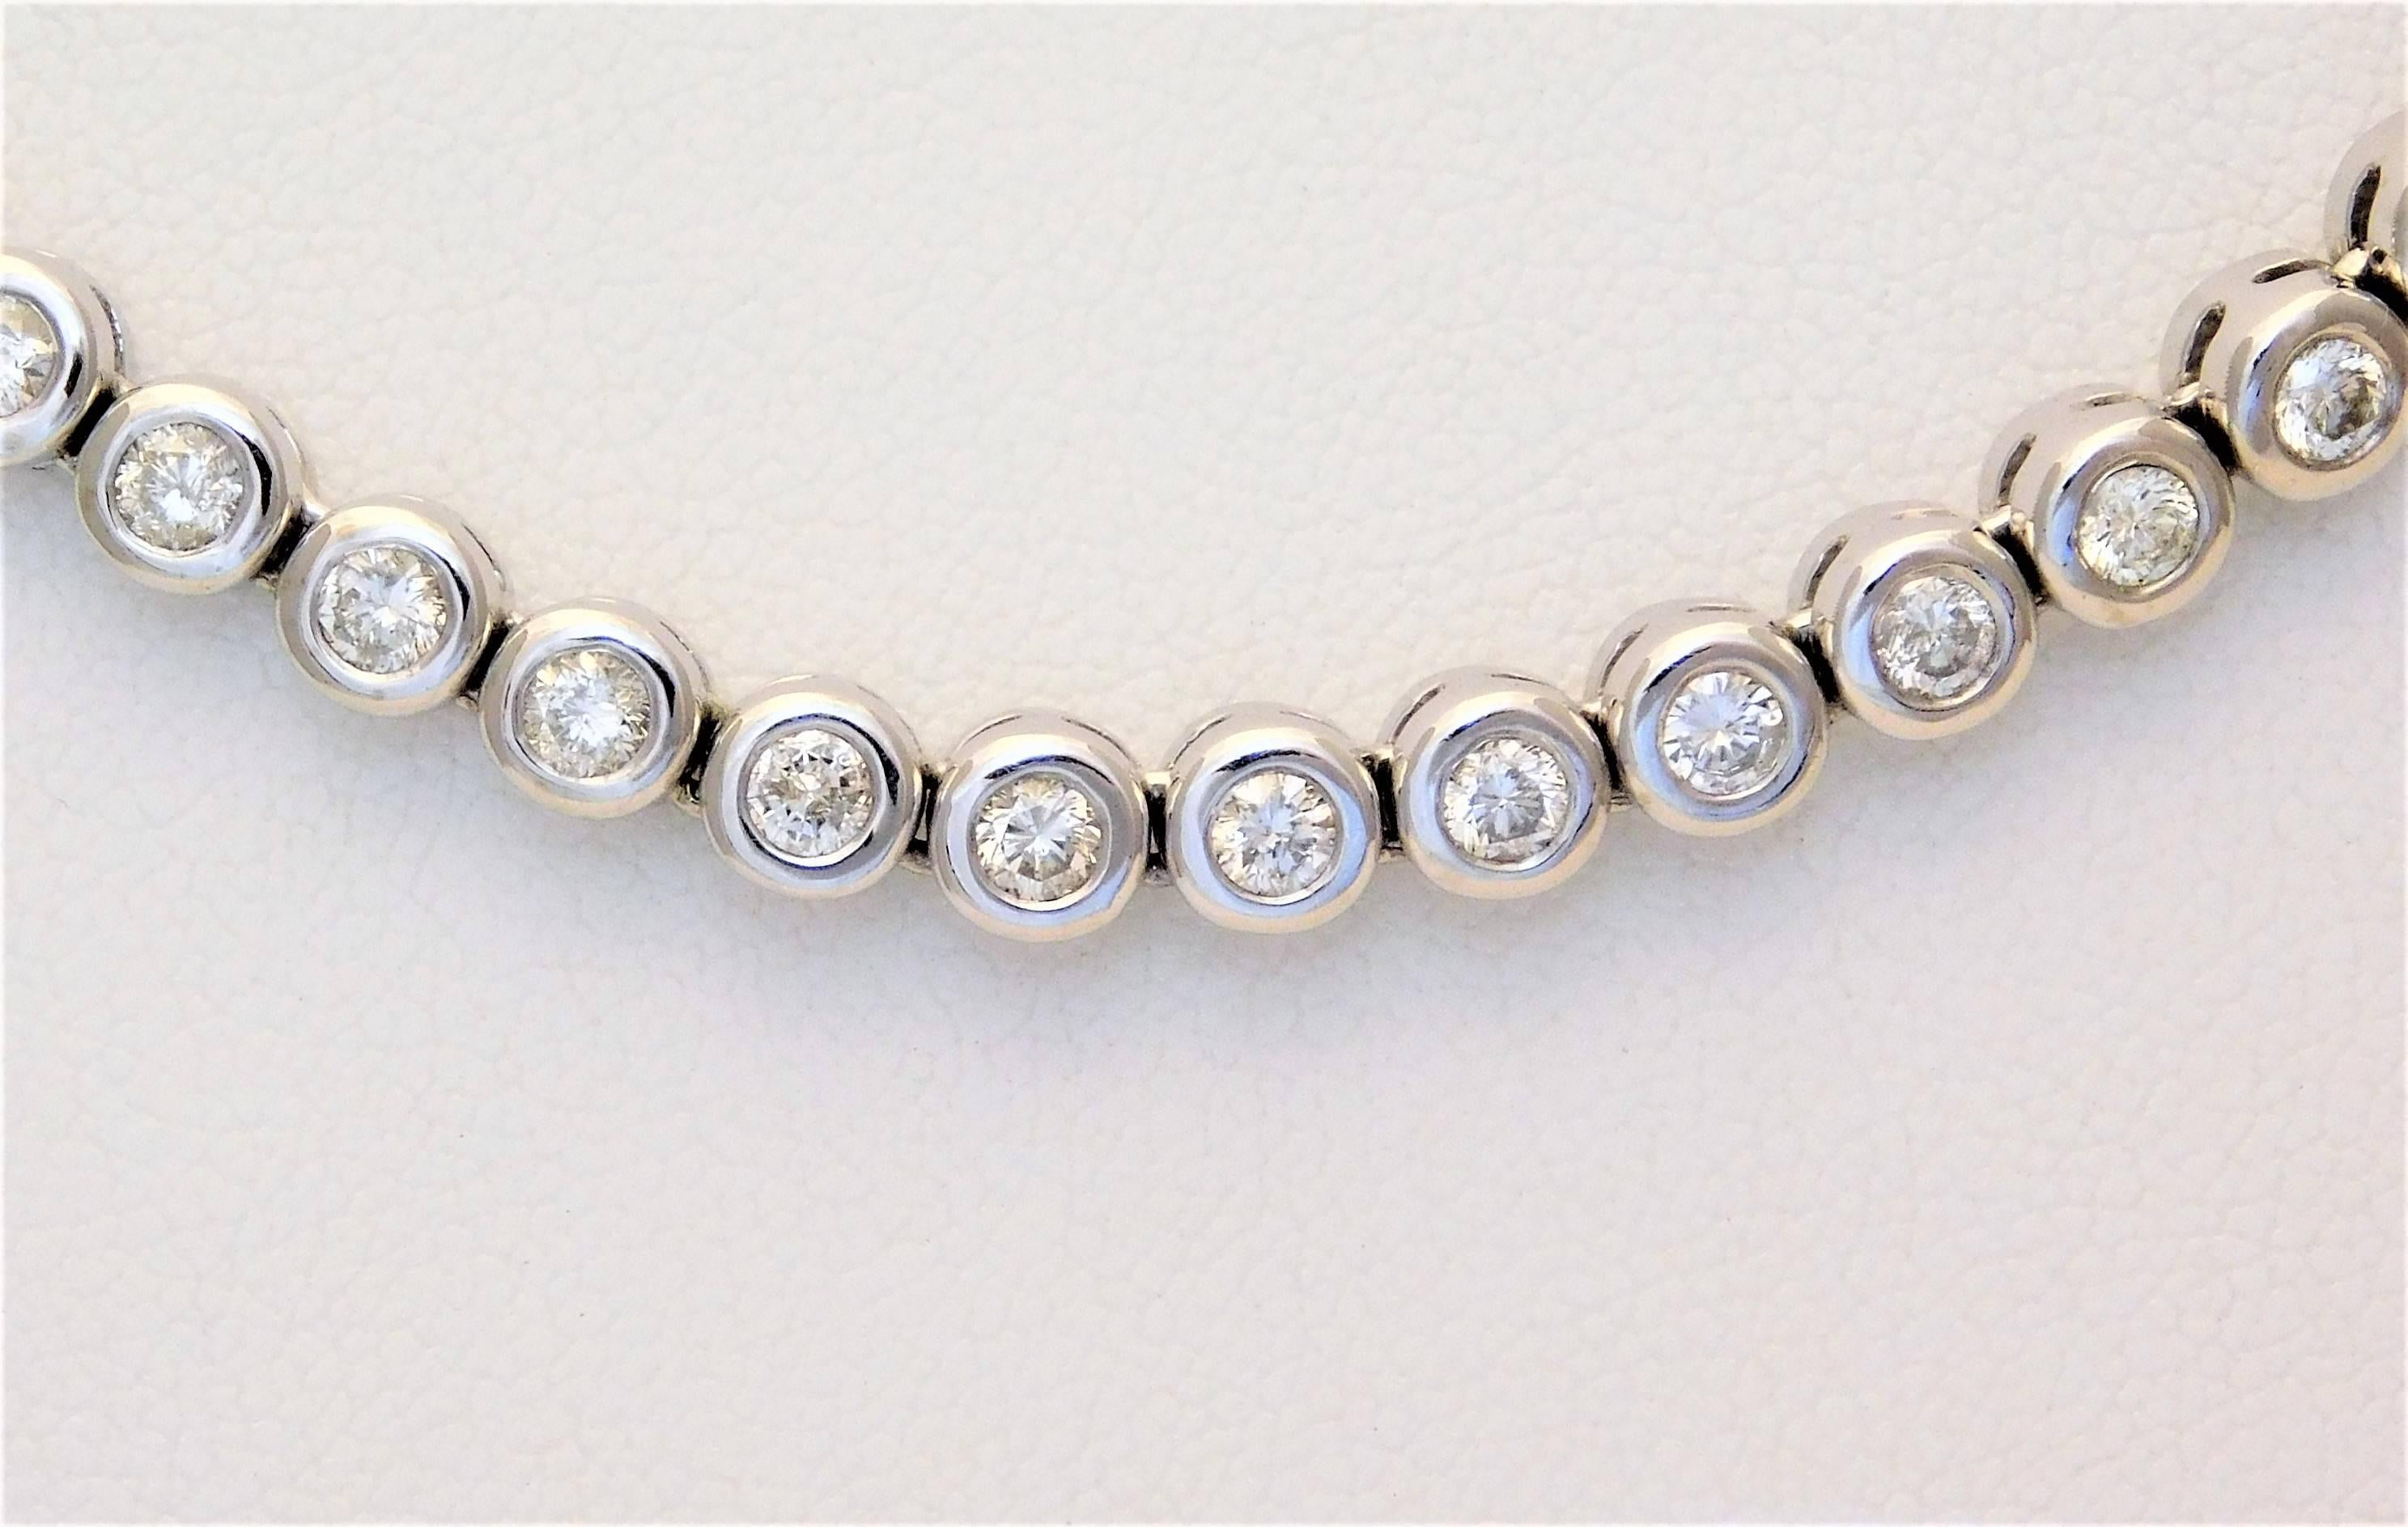 Exquisite 14k White Gold Rivière Necklace with Over 15ct of Bright and Sparkling Round Diamonds

An estate piece.  This absolutely fabulous necklace is made of solid 14k white gold.  It is polished, cleaned, and in “like new” condition.  This